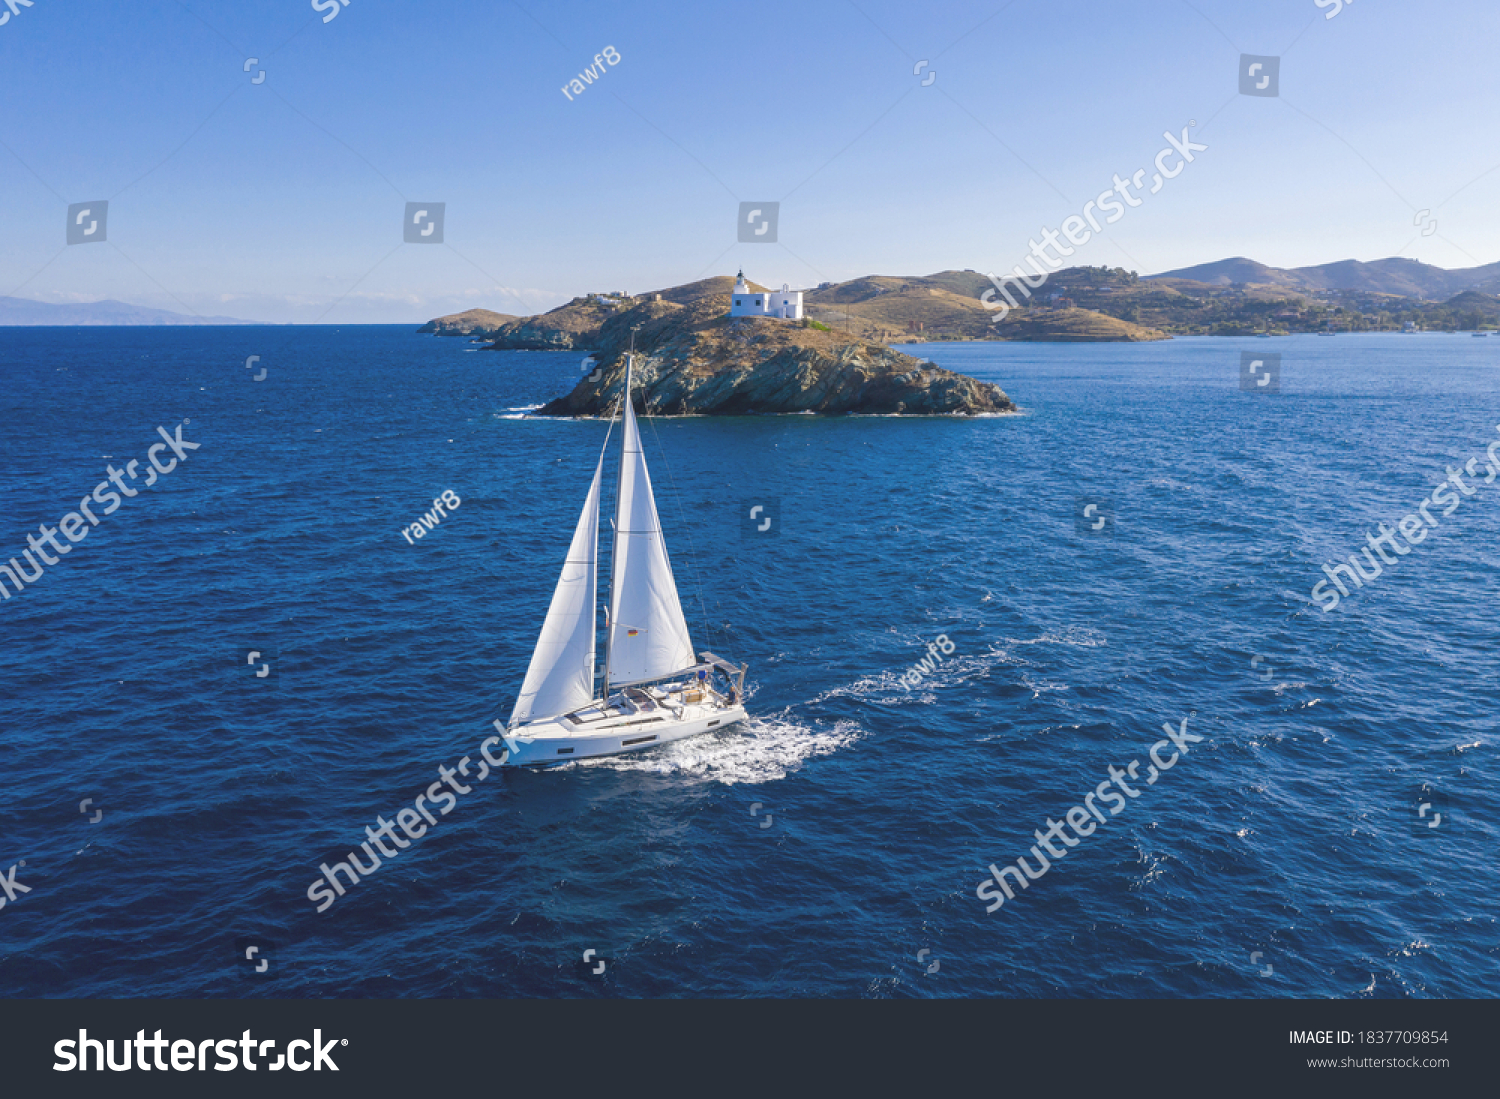 Sailing. Sailboat with white sails, rippled sea background, Lighthouse on a cape. Greece, Kea Tzia island. Summer holidays in Aegean sea. Aerial drone view #1837709854